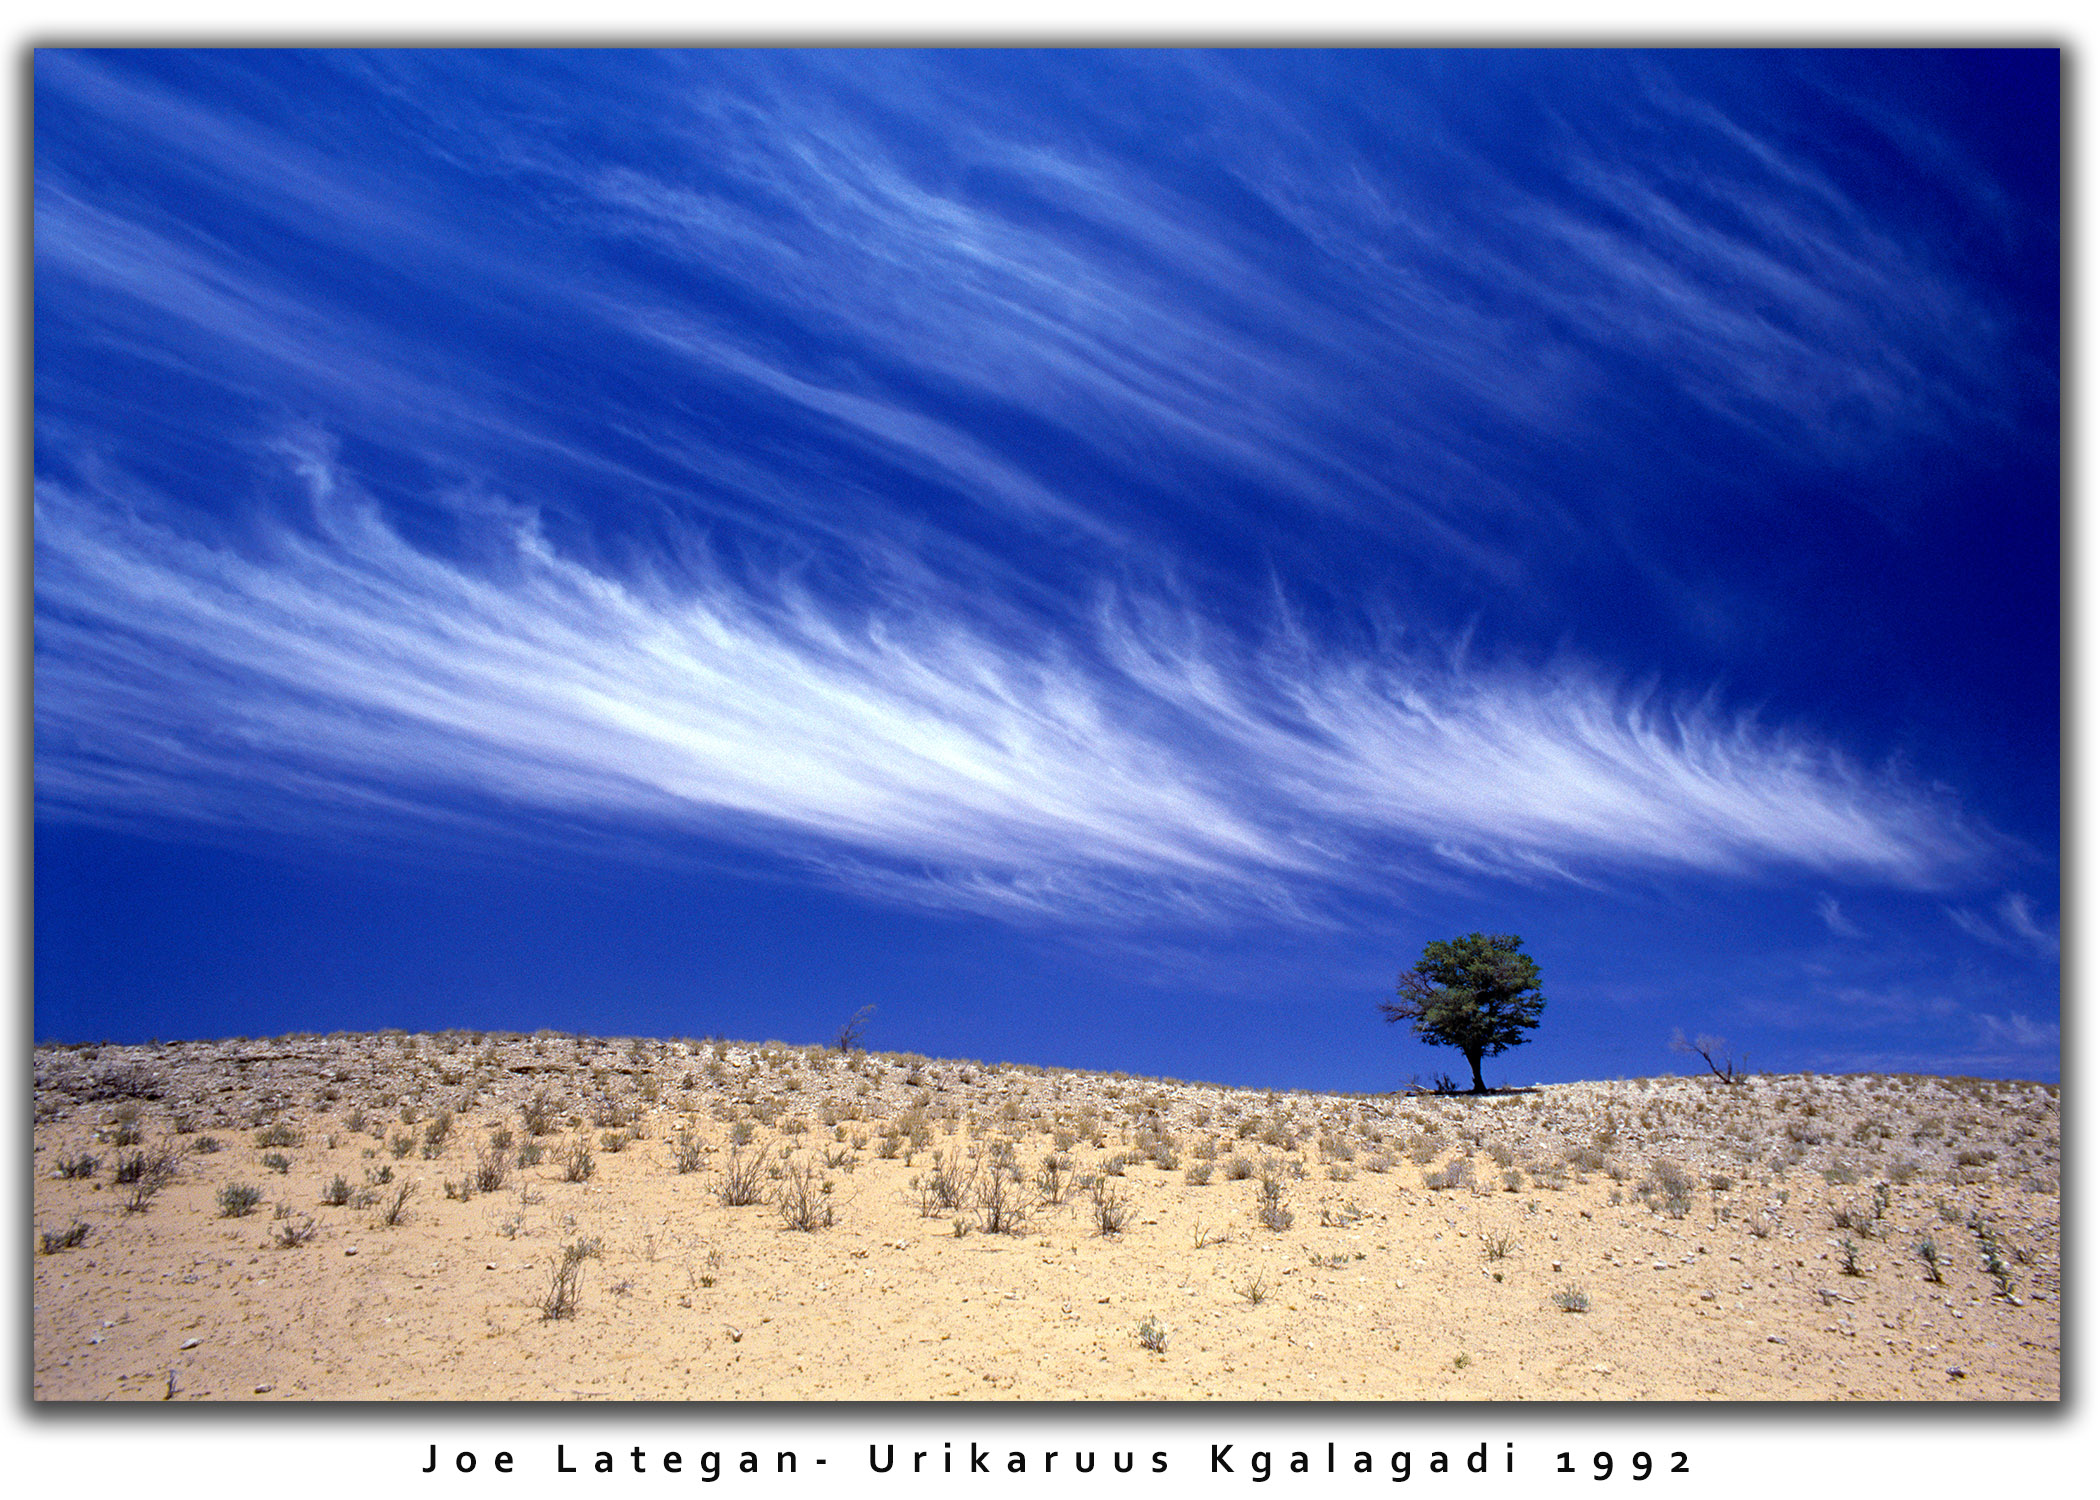 Landscape photographic opportunities in South Africa